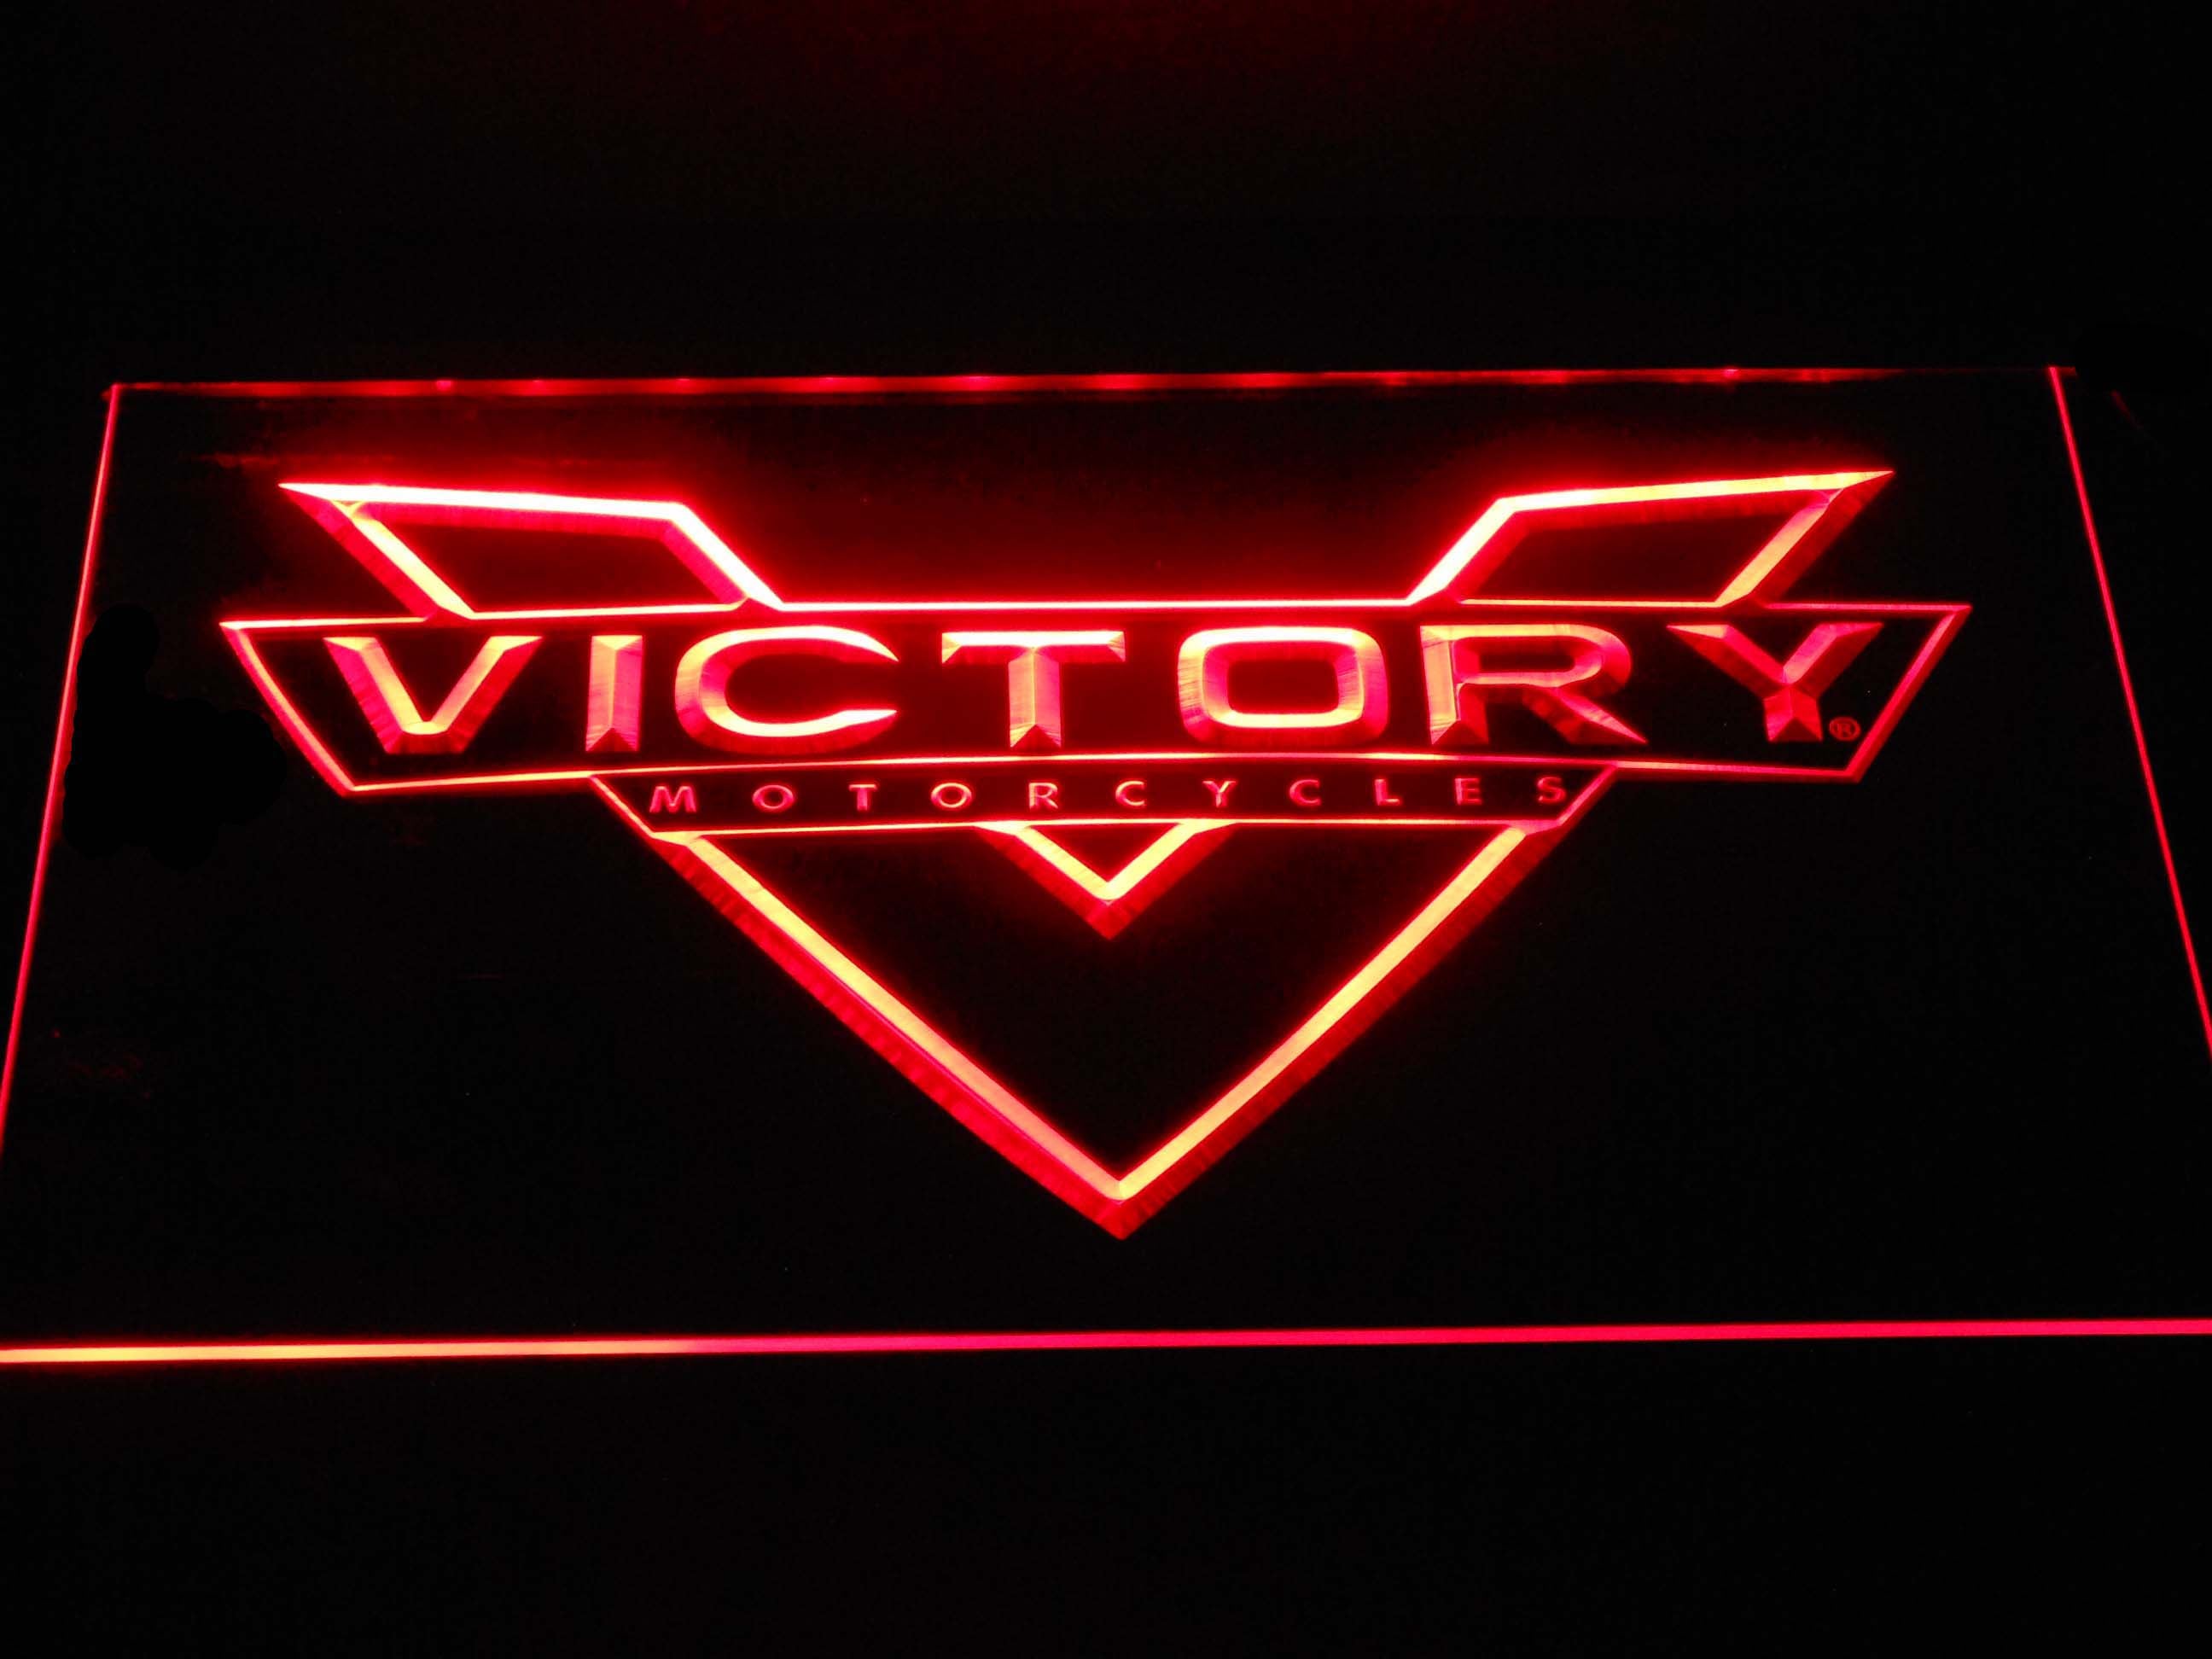 Victory Motorcycles Neon Light LED Sign